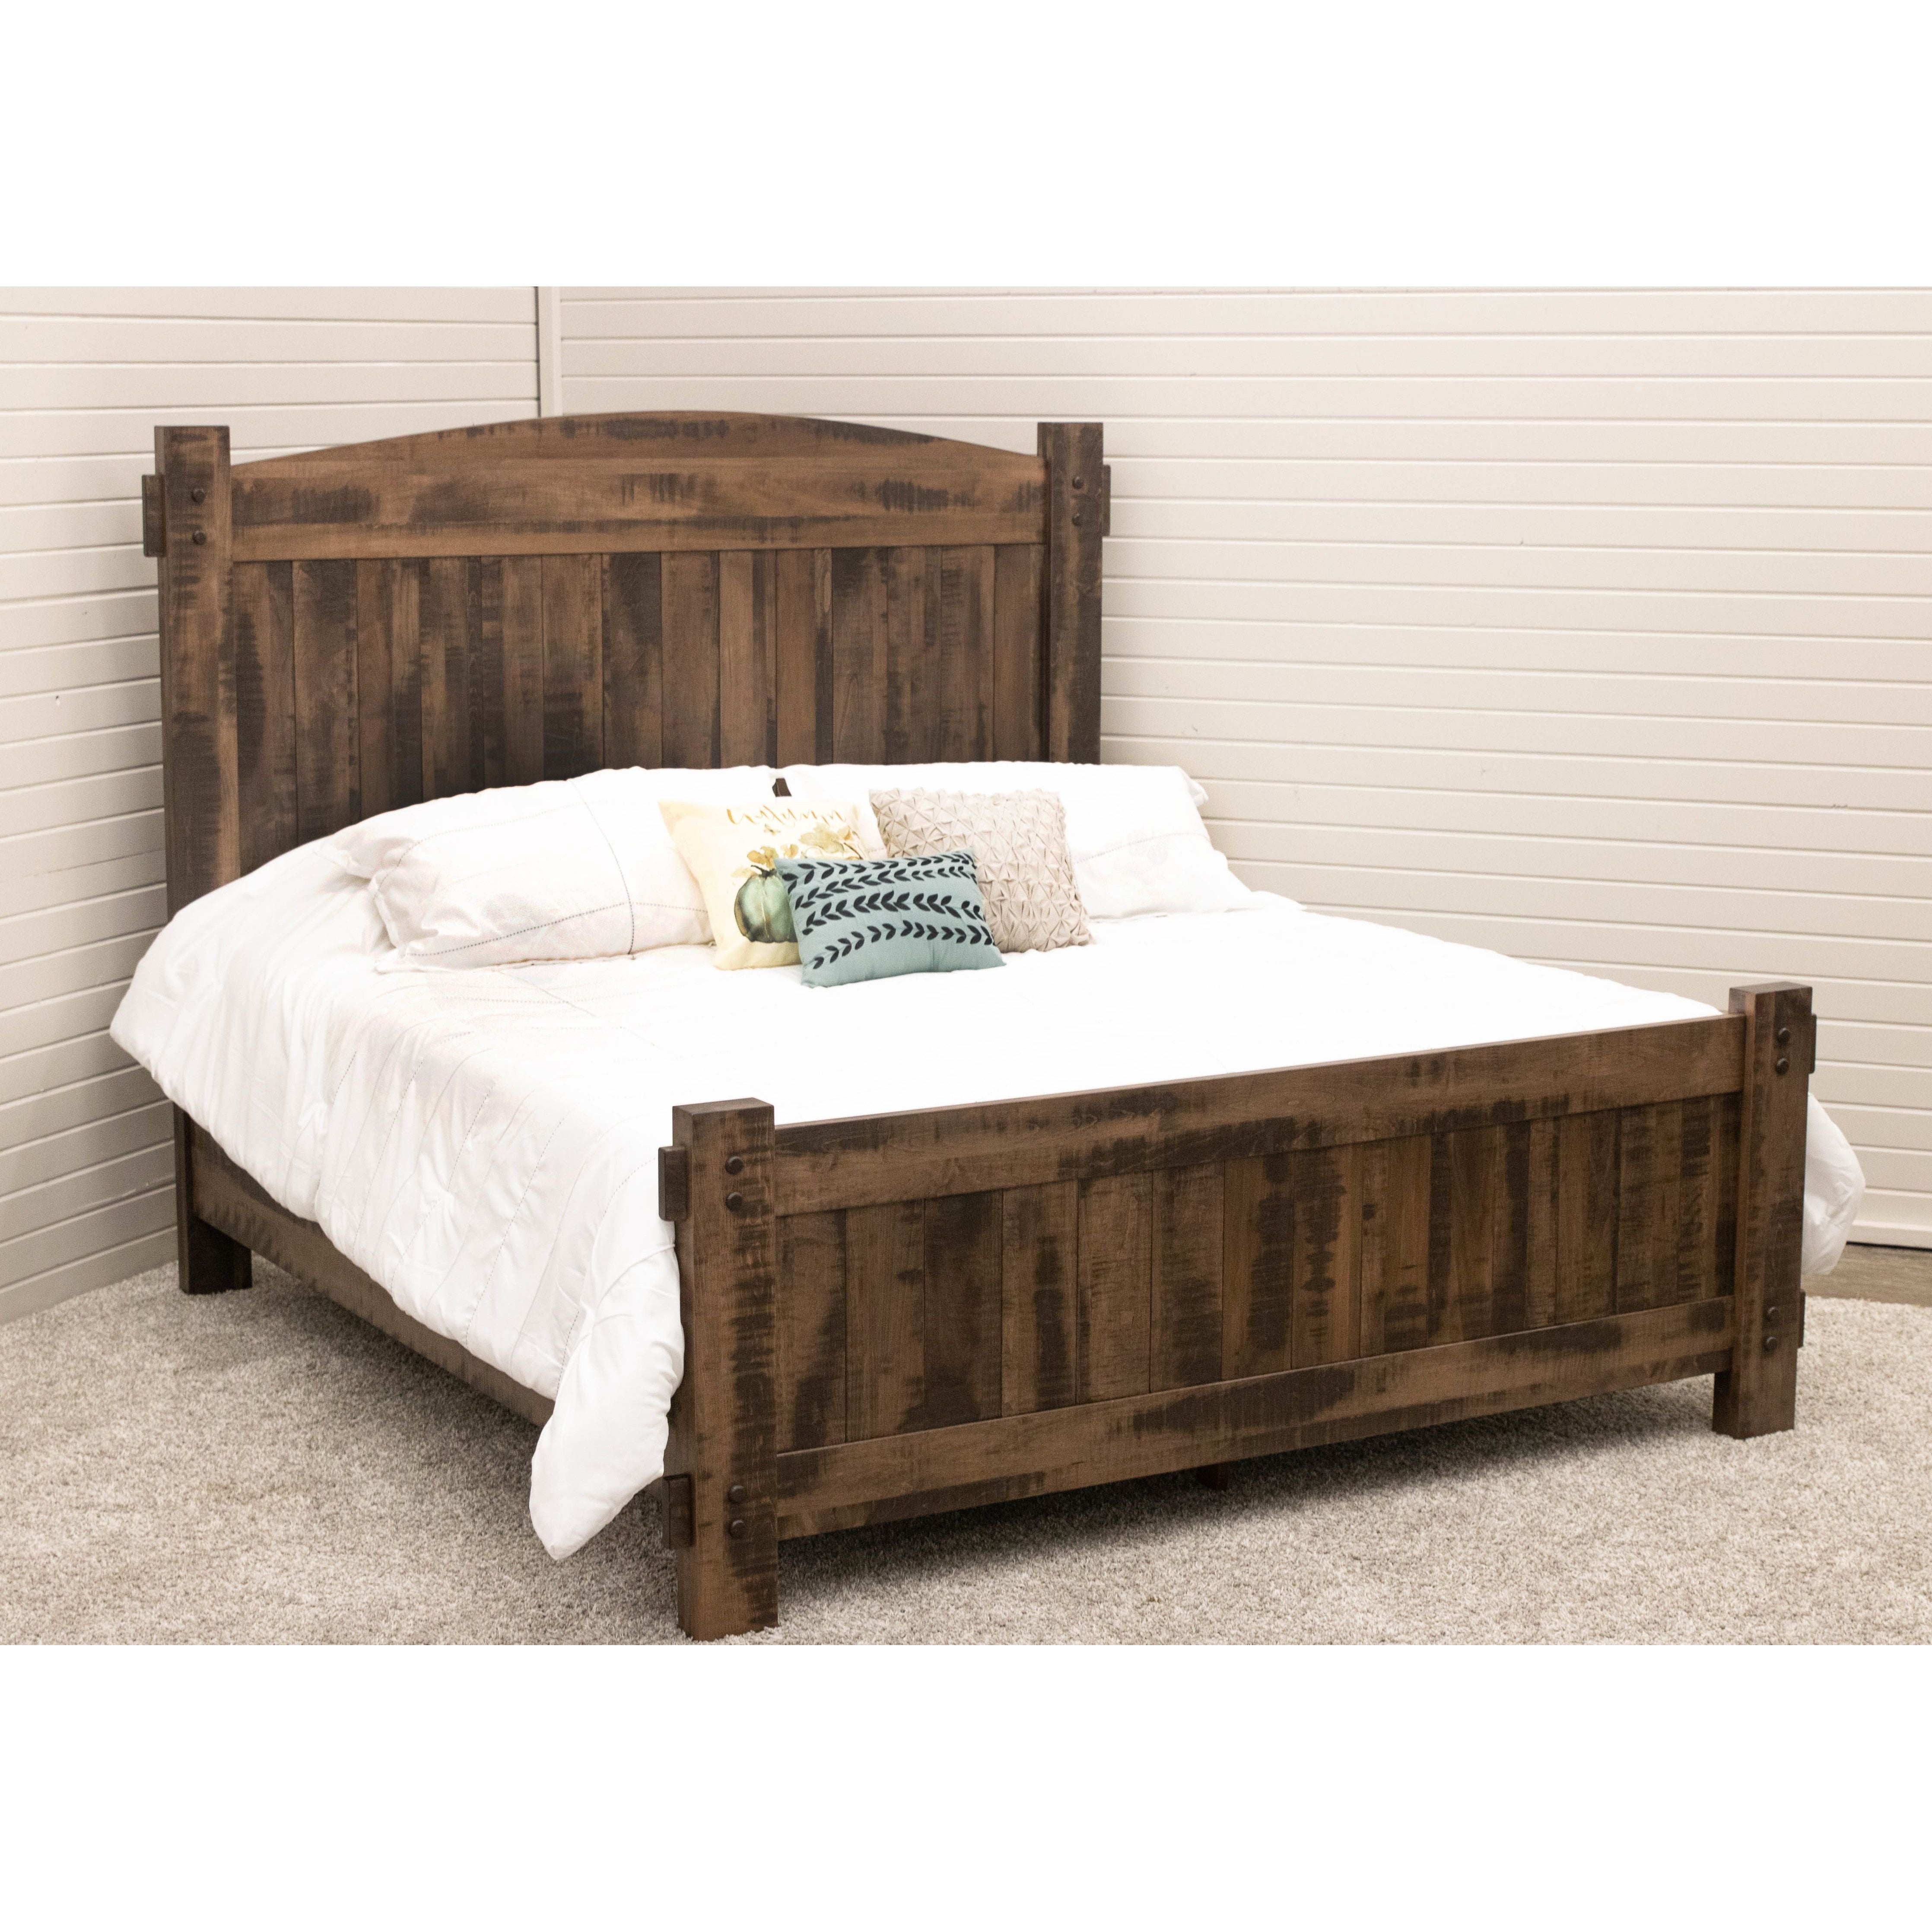 DCF Roughsawn Bed with Arched Headboard